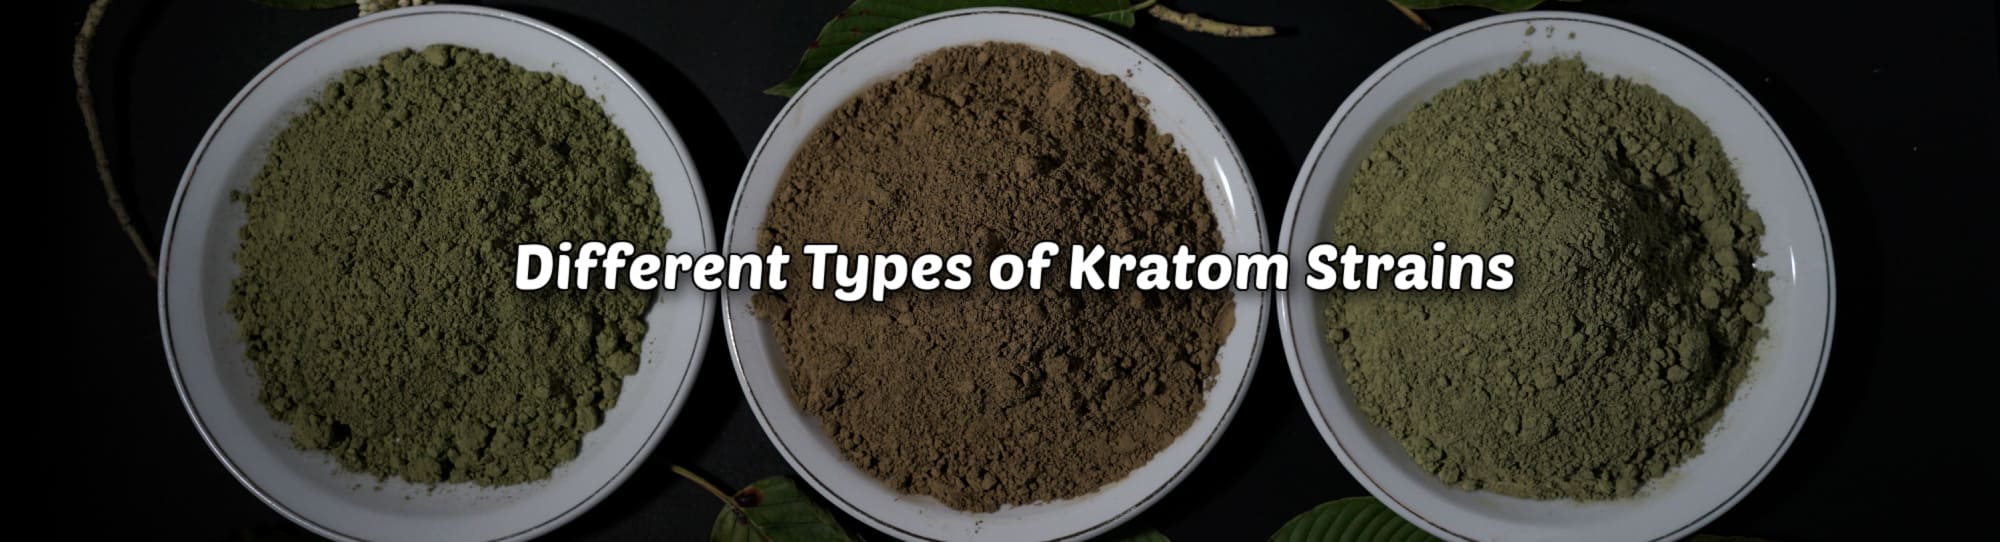 image of different types of kratom strains